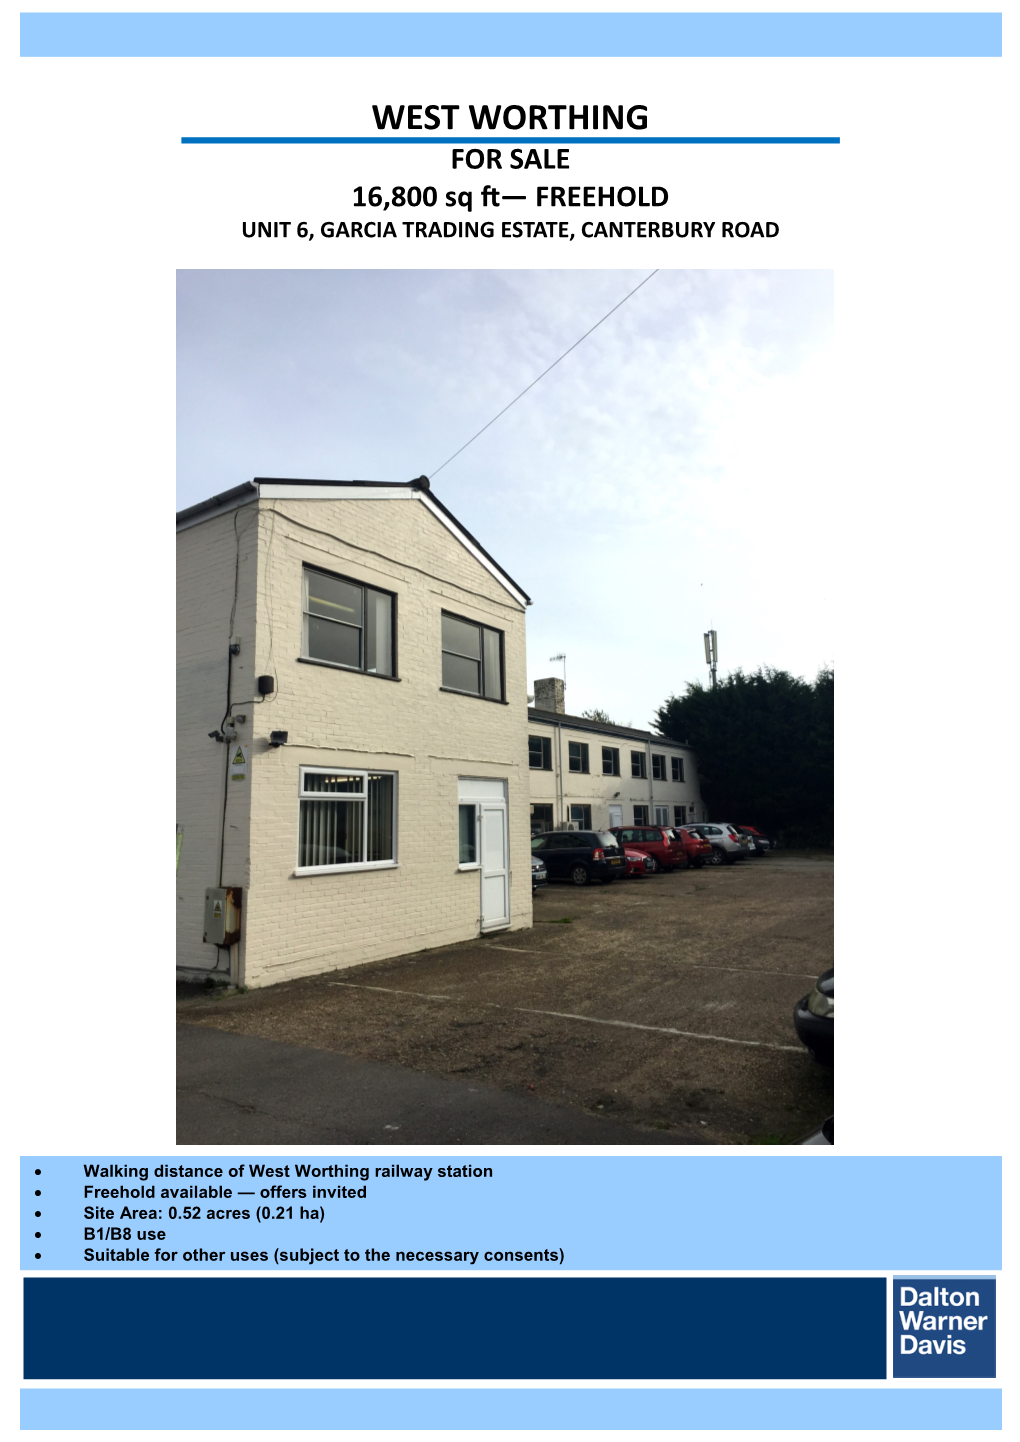 WEST WORTHING for SALE 16,800 Sq Ft— FREEHOLD UNIT 6, GARCIA TRADING ESTATE, CANTERBURY ROAD